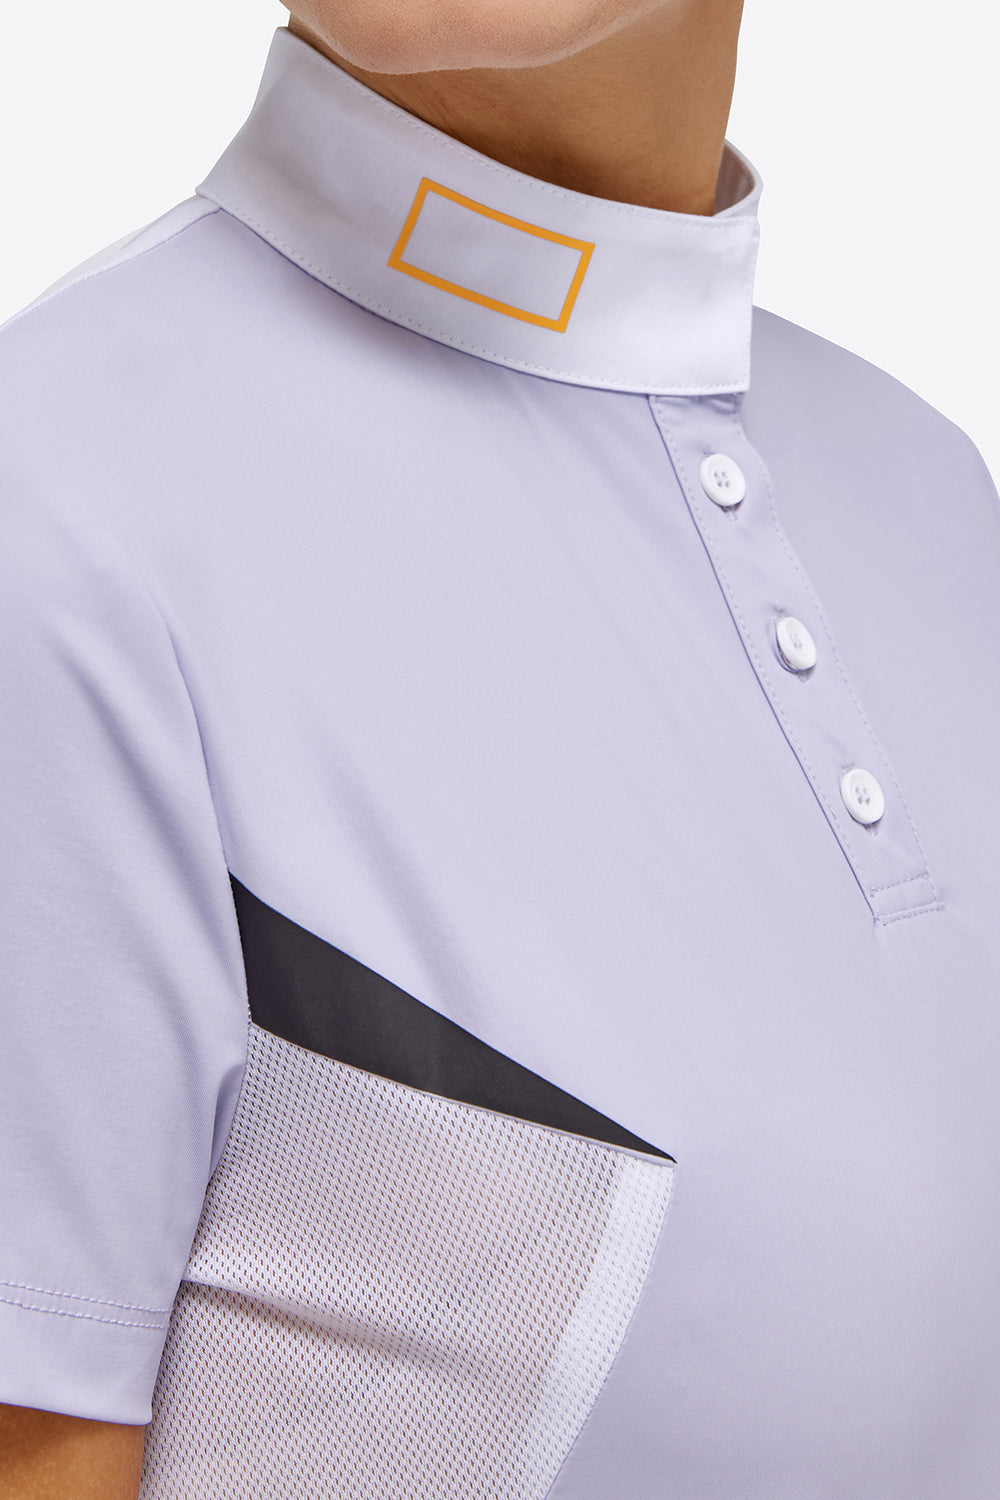 RG Women's Jersey S/S Button Competition Polo